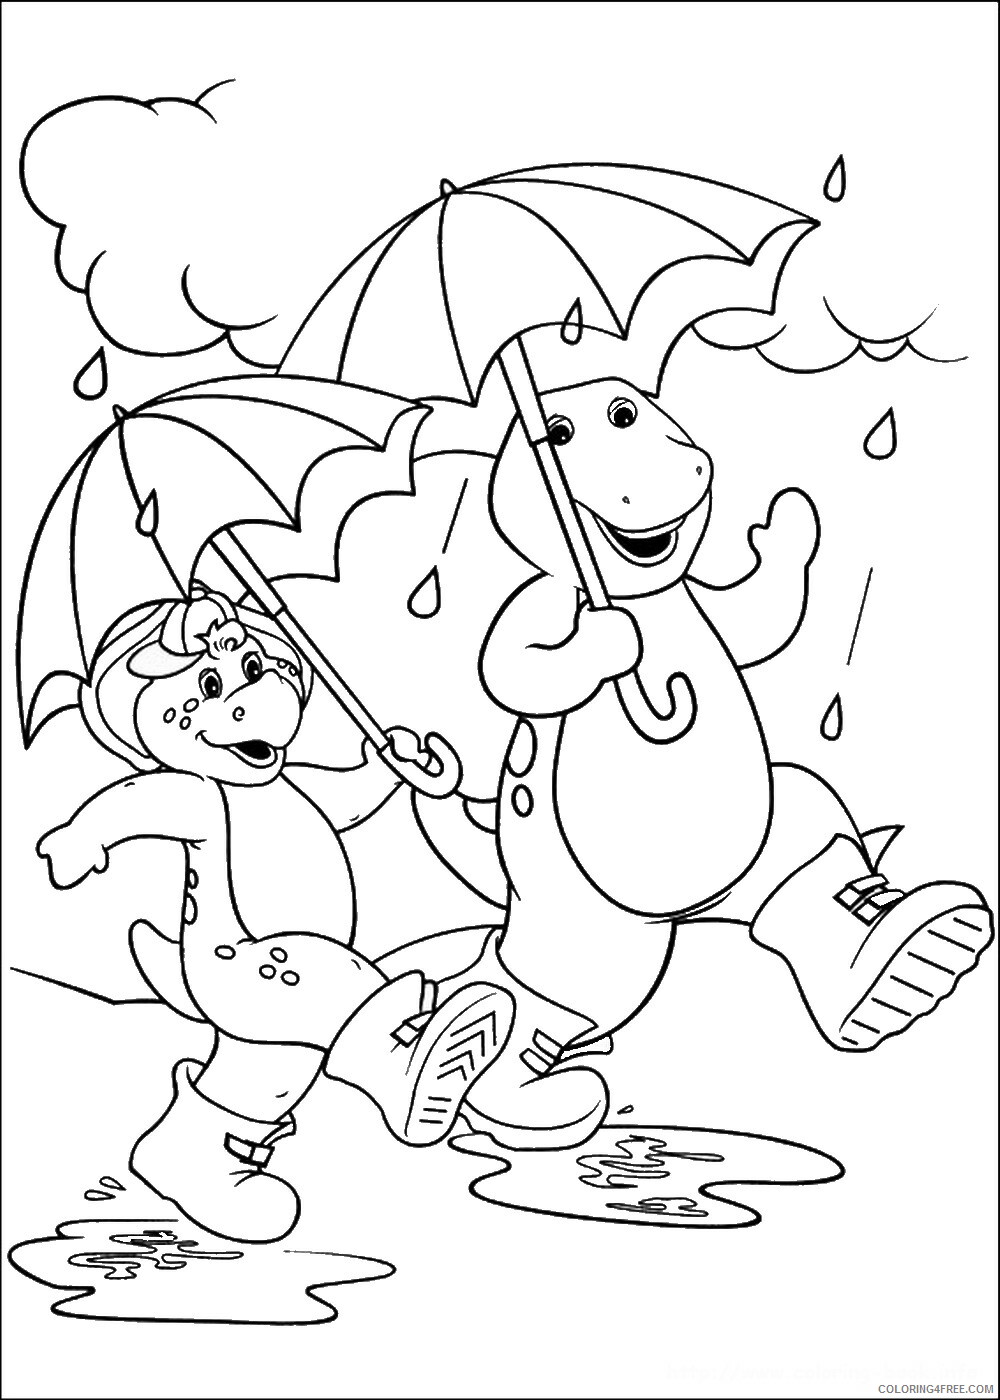 Barney and Friends Coloring Pages TV Film barney_cl_1027 Printable 2020 00600 Coloring4free